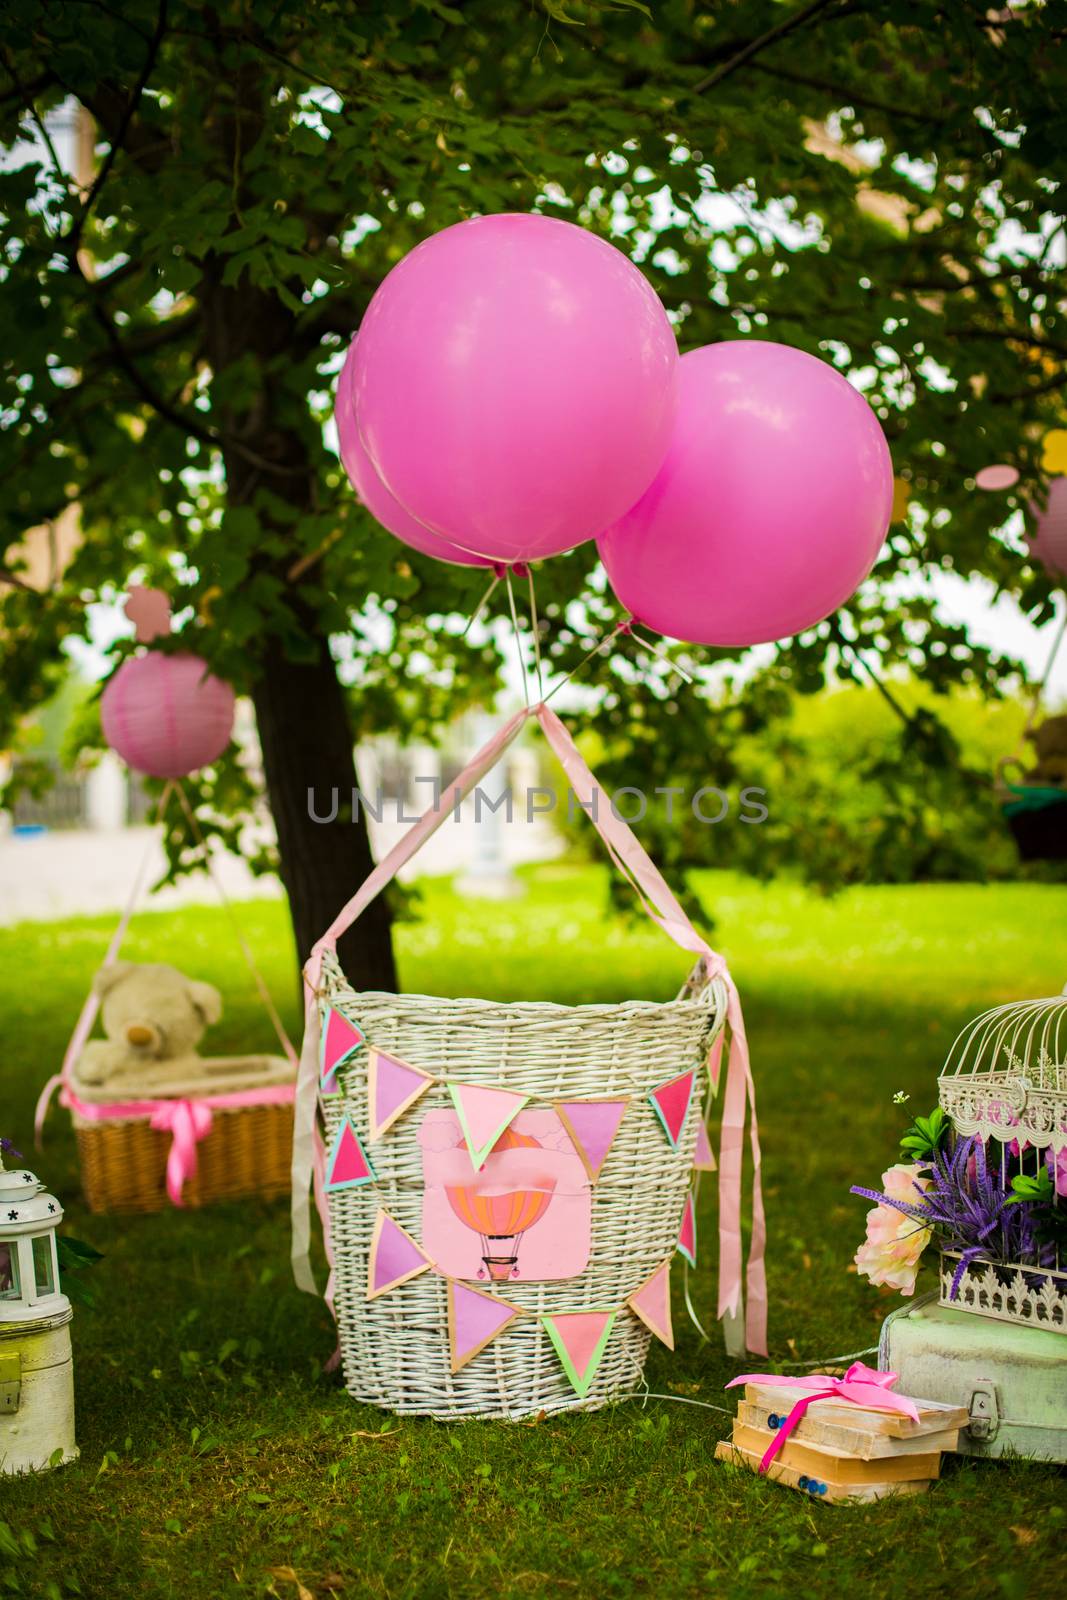 street decorations for a children's party. Wicker baskets with balloons in a green park.